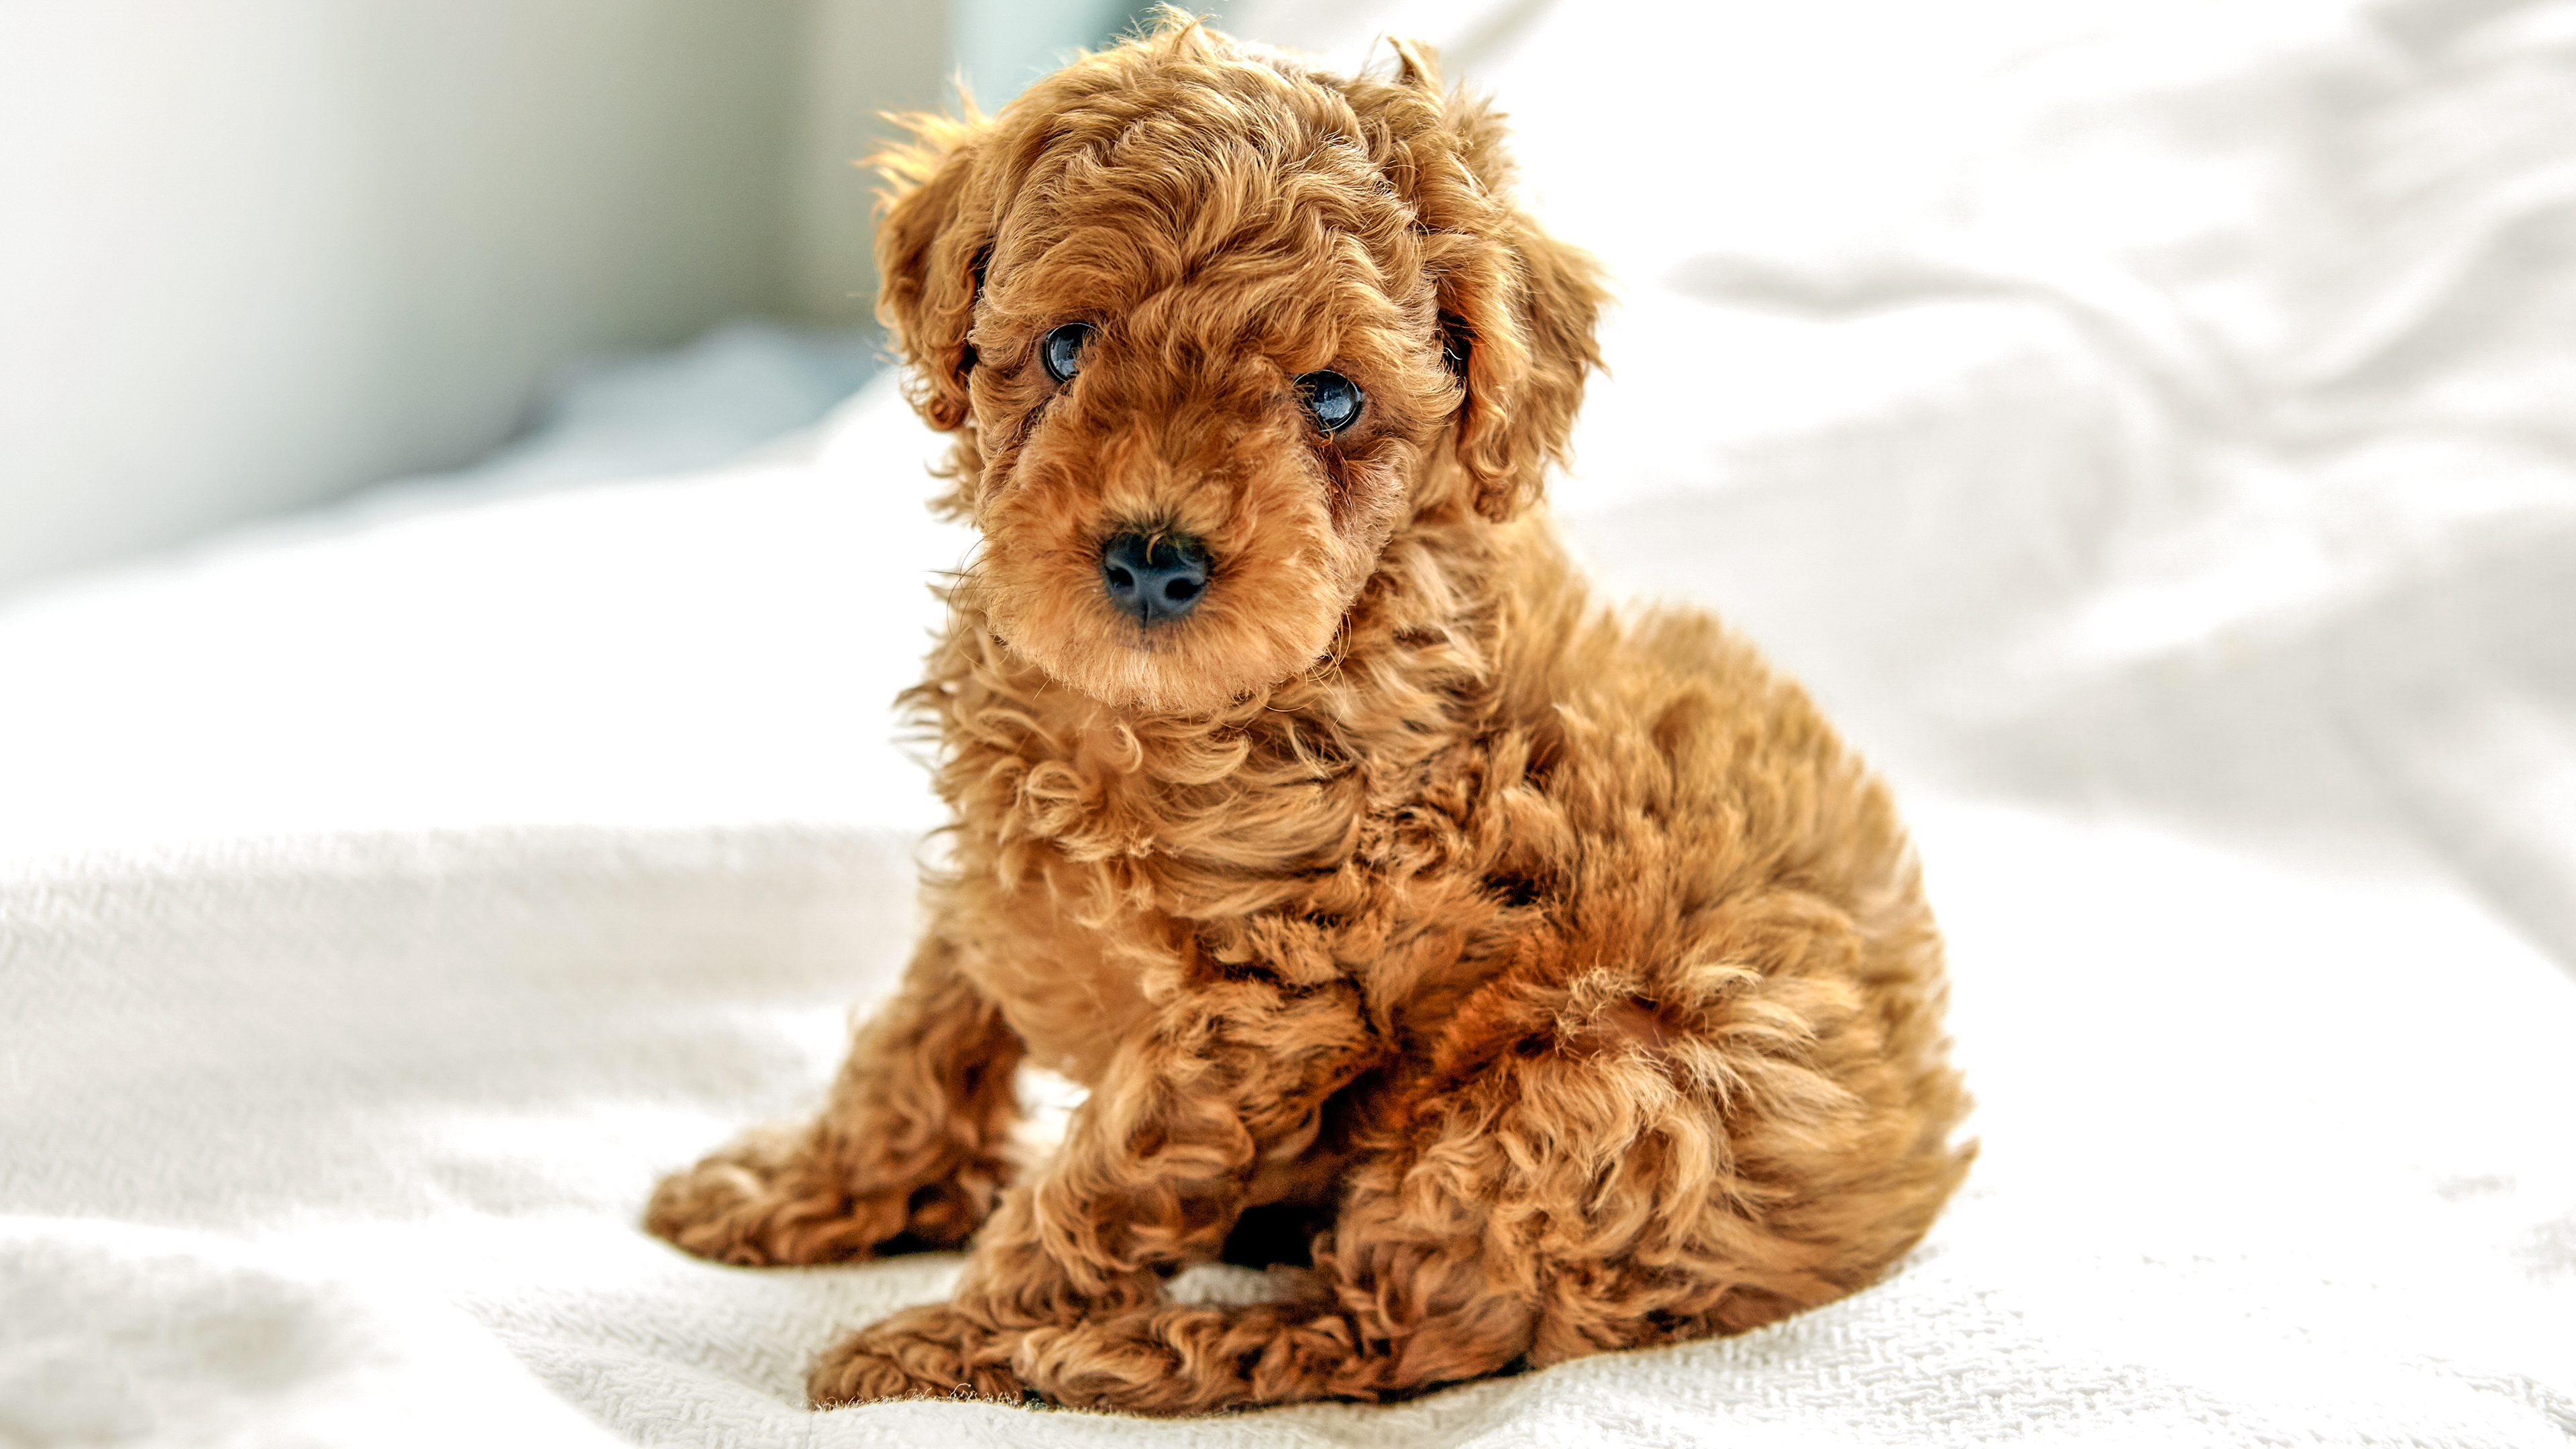 Poodle puppy sitting down on a white sheet